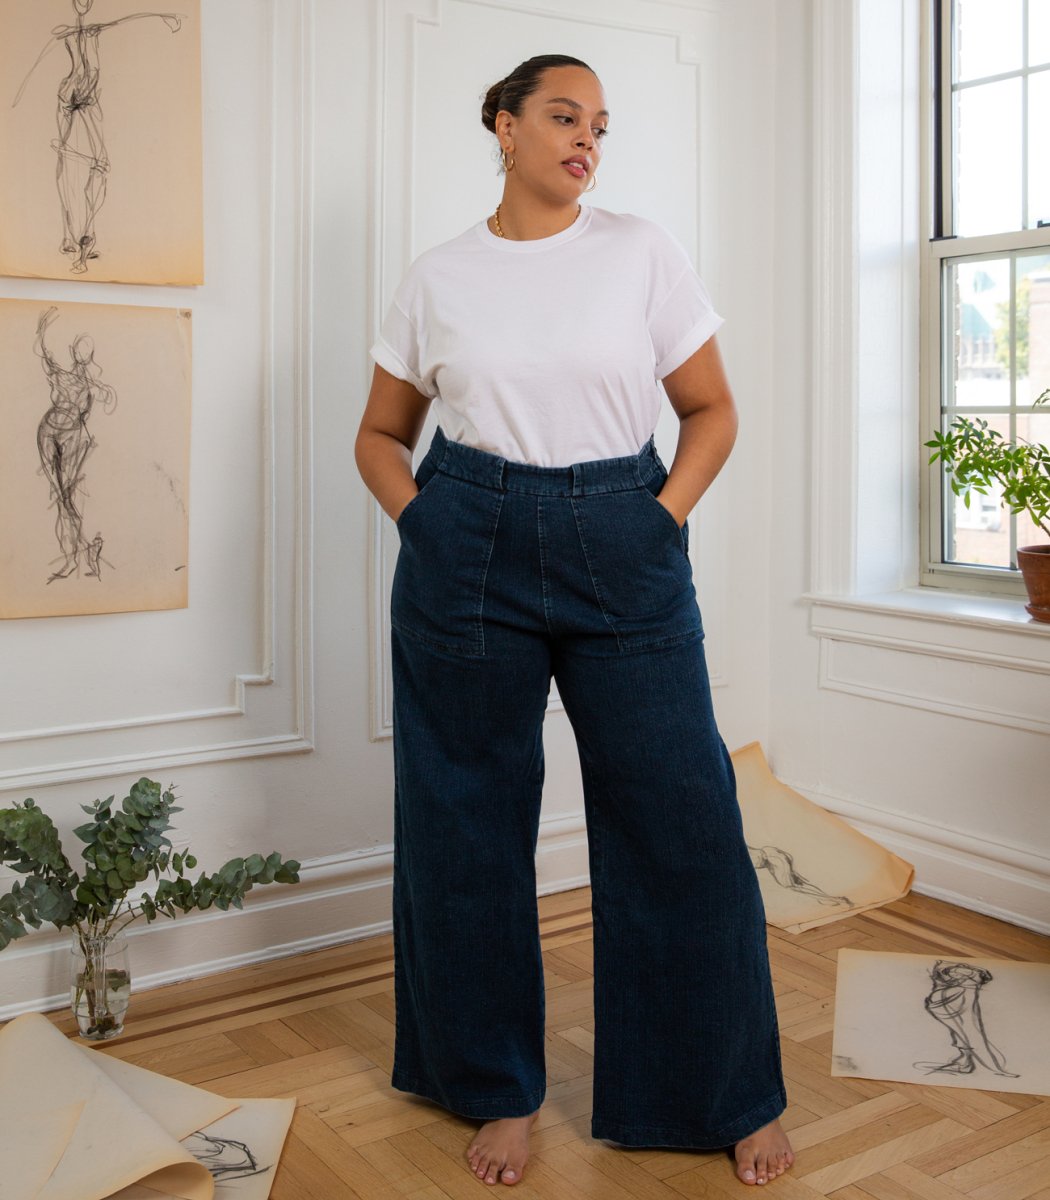 A model wears long wide legged denim pants with large front pockets. The Long Sabrina Jeans in Dark Indigo are designed by Loup and made in New York City, USA.